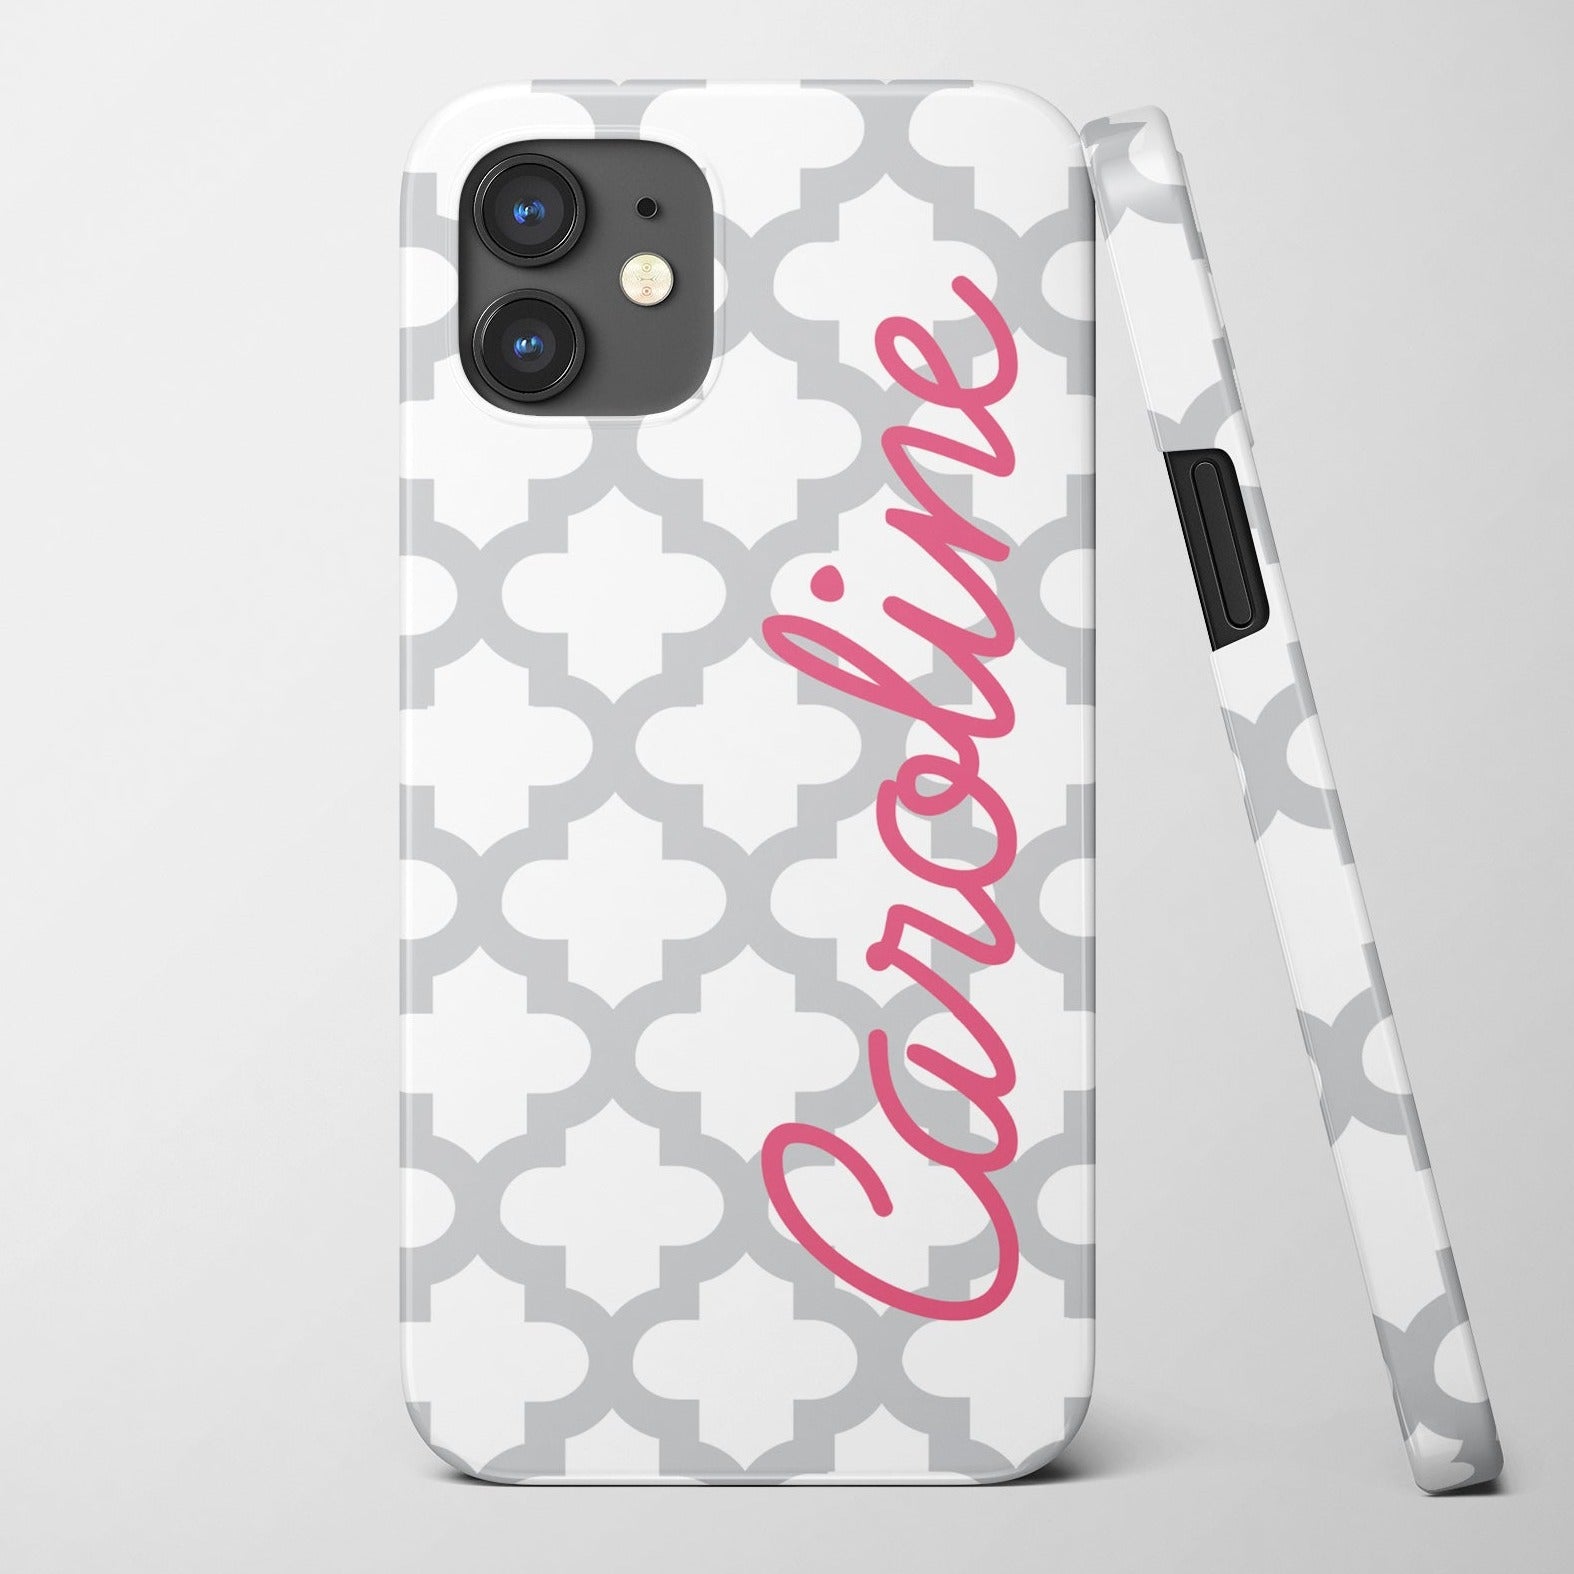 Personalized iphone case for women, gray quatrefoil pattern with hot pink name, choose  snap or tough case, colors can be customized